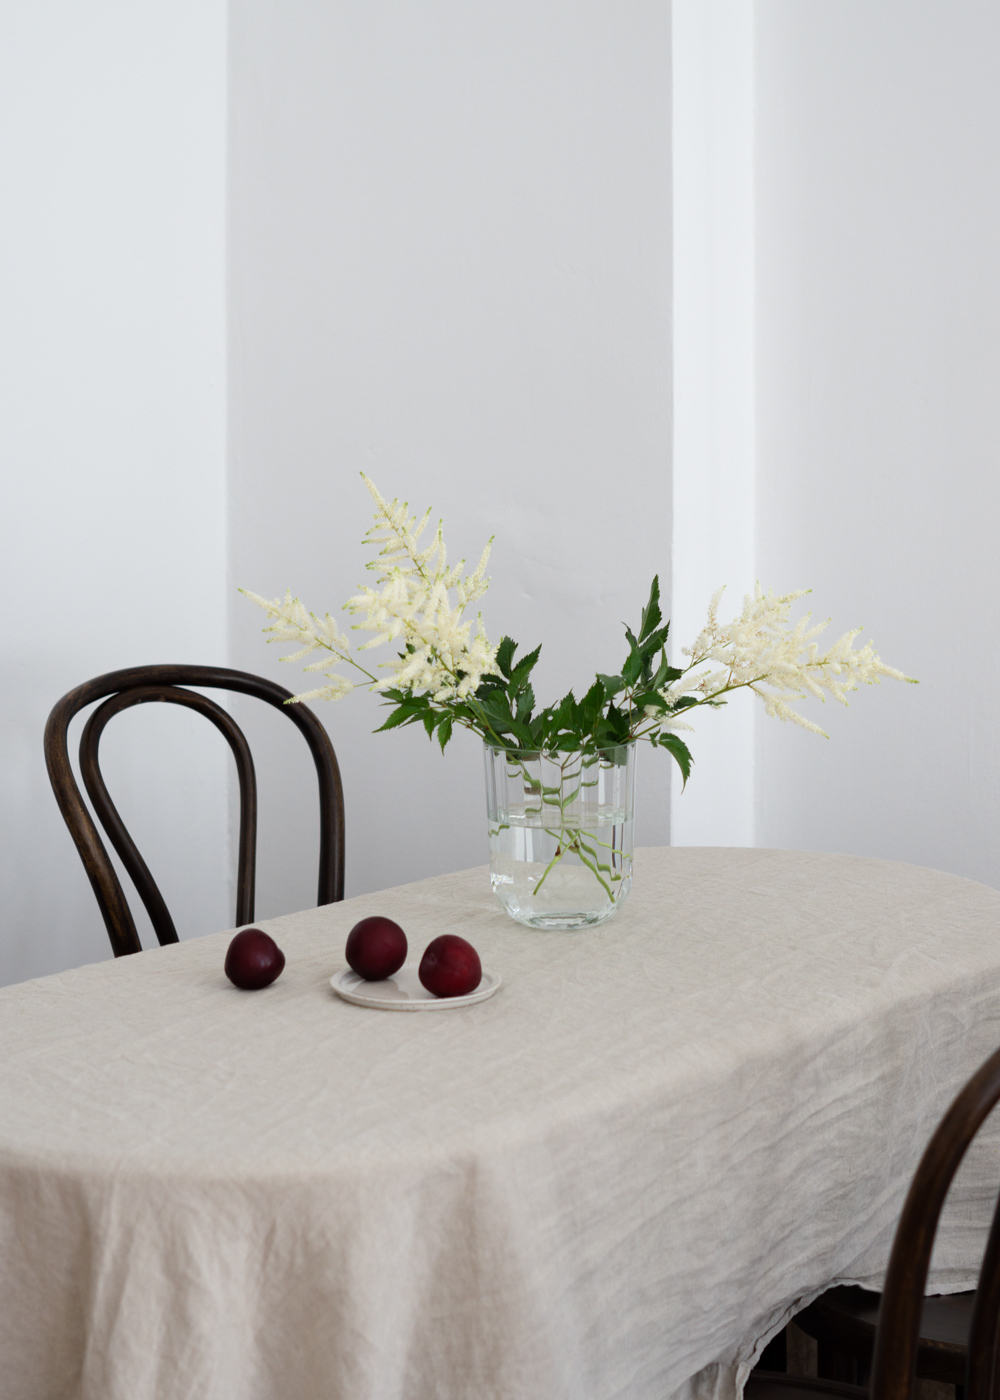 H&M Home Beige Linen Table Cloth, Glass Vase with Flowers - Neutral Home, Scandinavian Interior, Natural Aesthetic, Minimalist Decor, Beige Style, RG Daily Blog